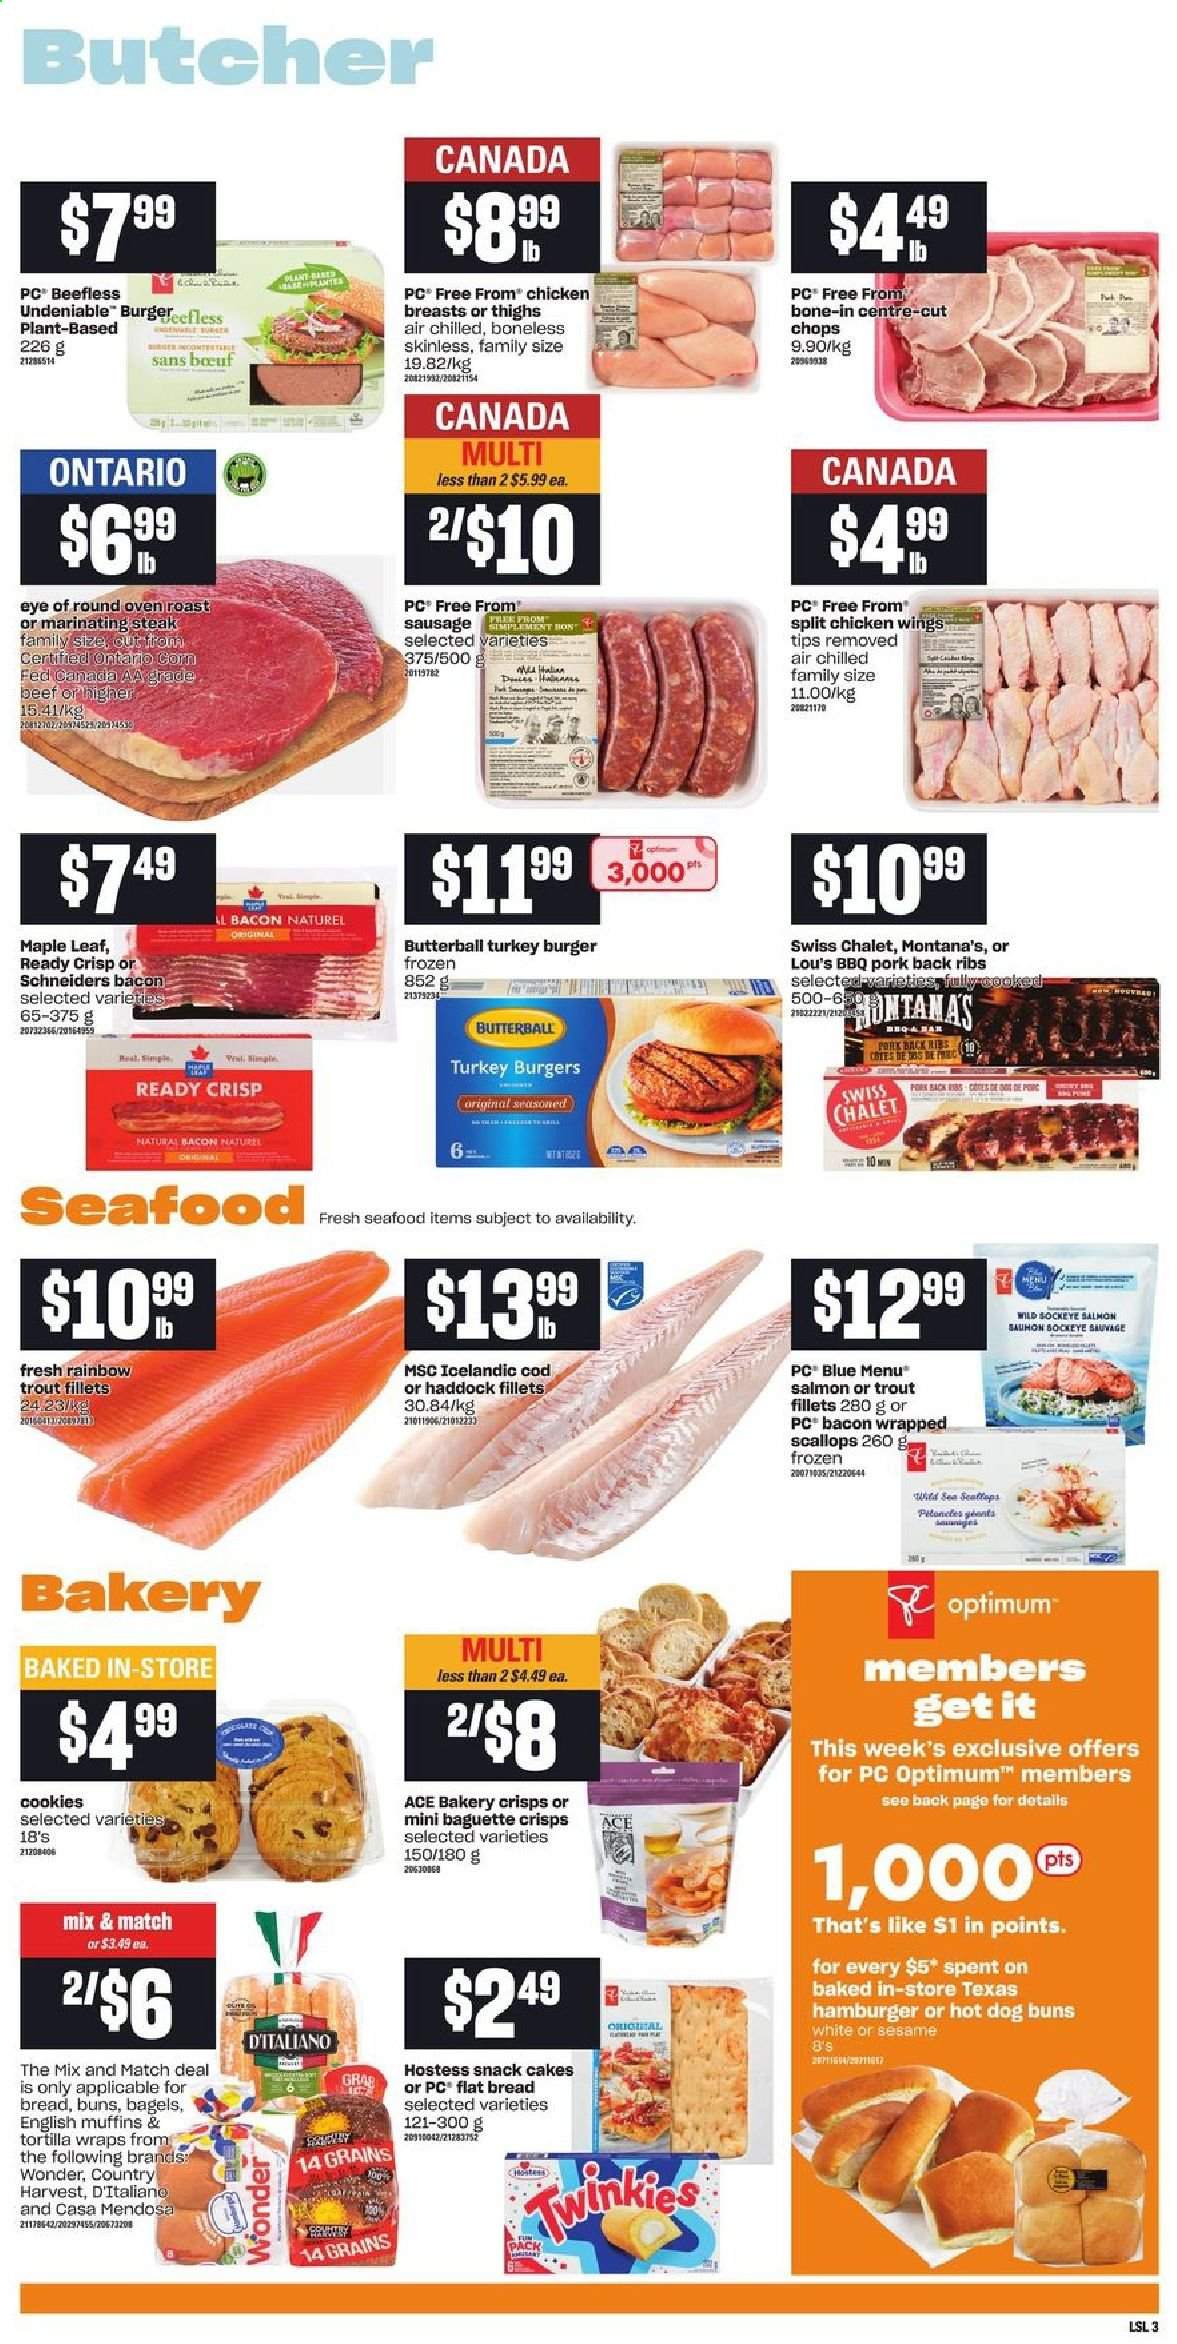 thumbnail - Loblaws Flyer - May 27, 2021 - June 02, 2021 - Sales products - bagels, english muffins, tortillas, cake, buns, ACE Bakery, wraps, bacon wrapped scallops, cod, salmon, scallops, trout, haddock, seafood, bacon, Butterball, sausage, Country Harvest, chicken wings, cookies, snack, chicken breasts, eye of round, turkey burger, pork meat, pork ribs, pork back ribs, Optimum, steak. Page 4.